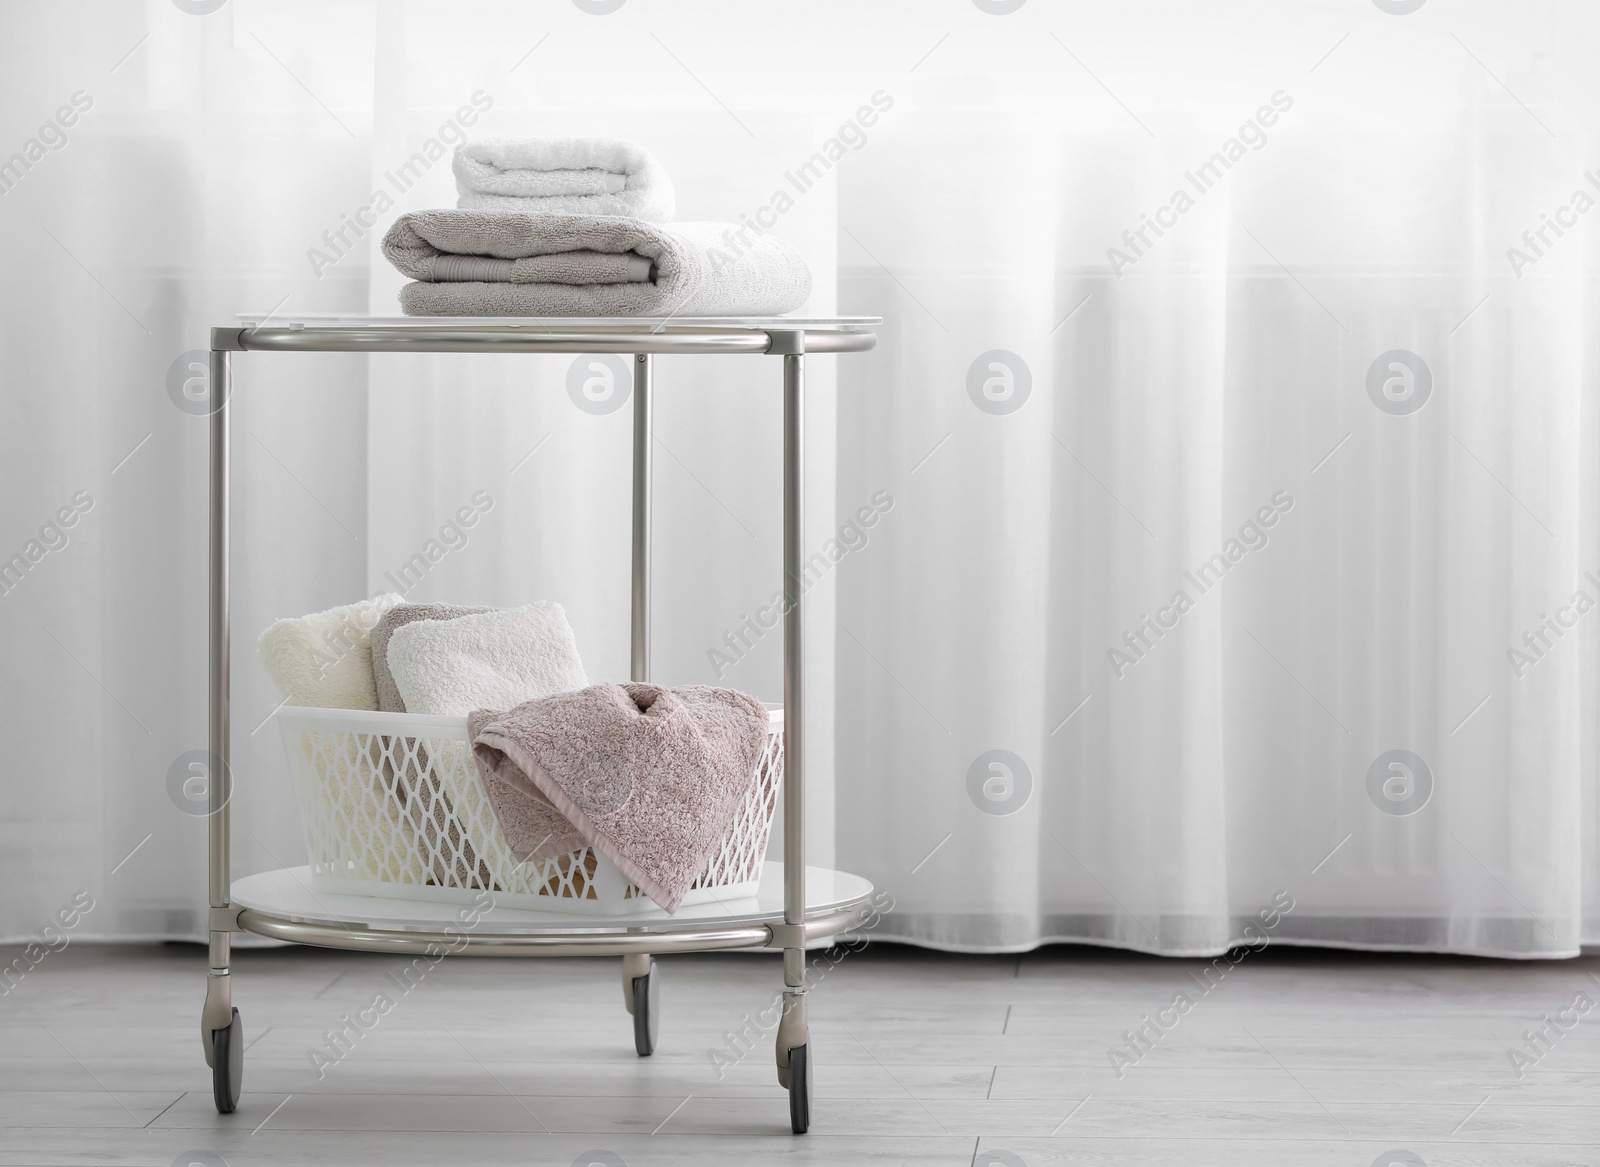 Photo of Cart with clean towels indoors